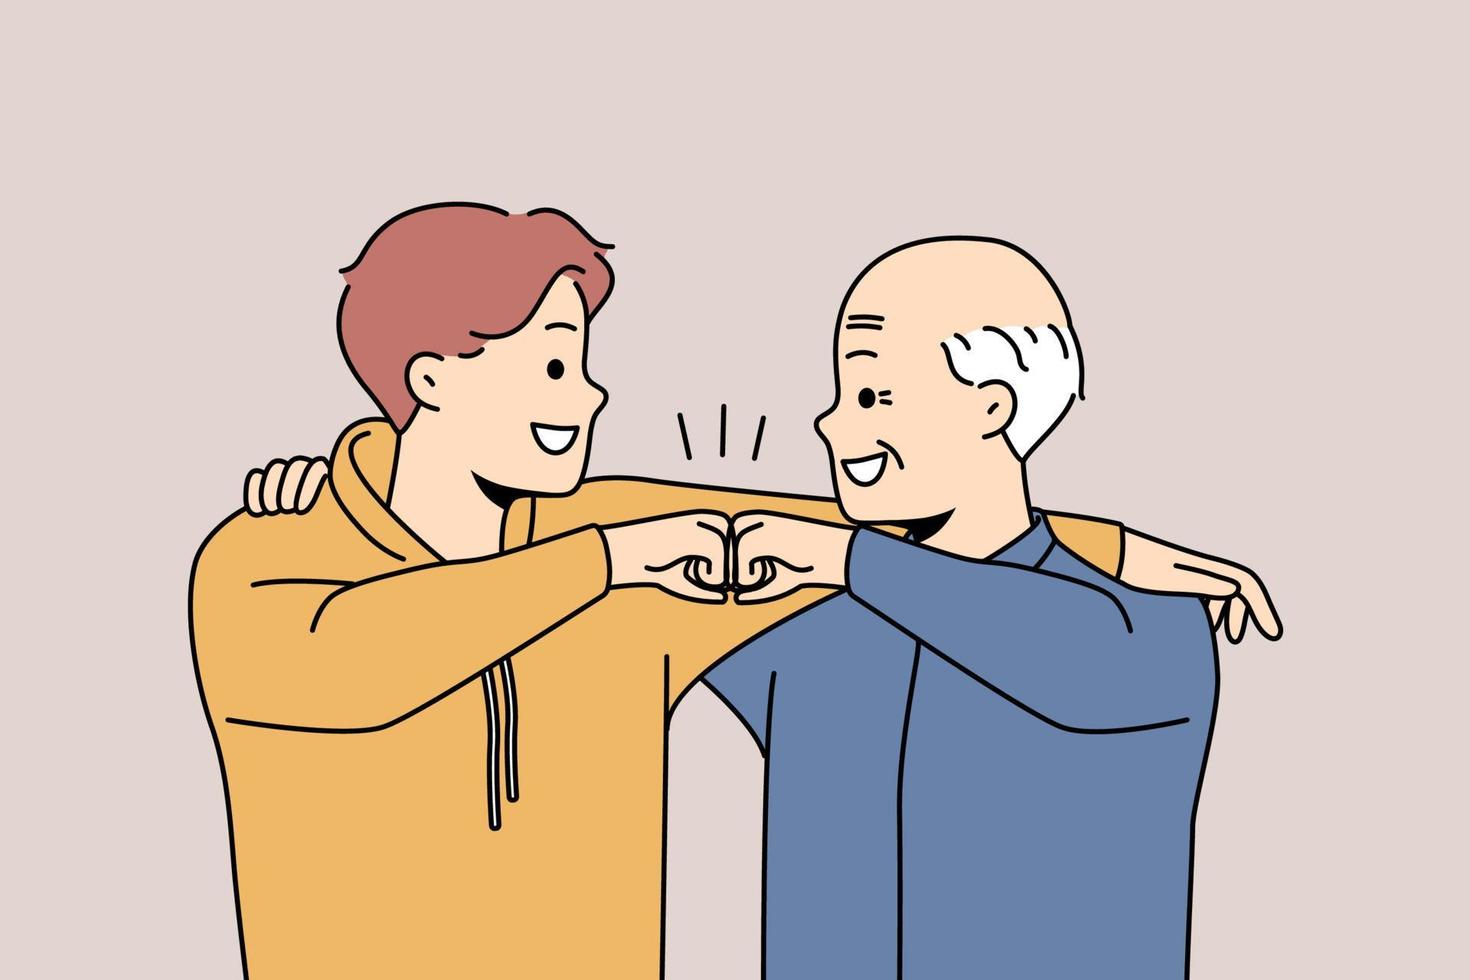 Smiling grandfather and grandson give fists bump show bonding and connection. Happy younger and older generation friendship. Vector illustration.